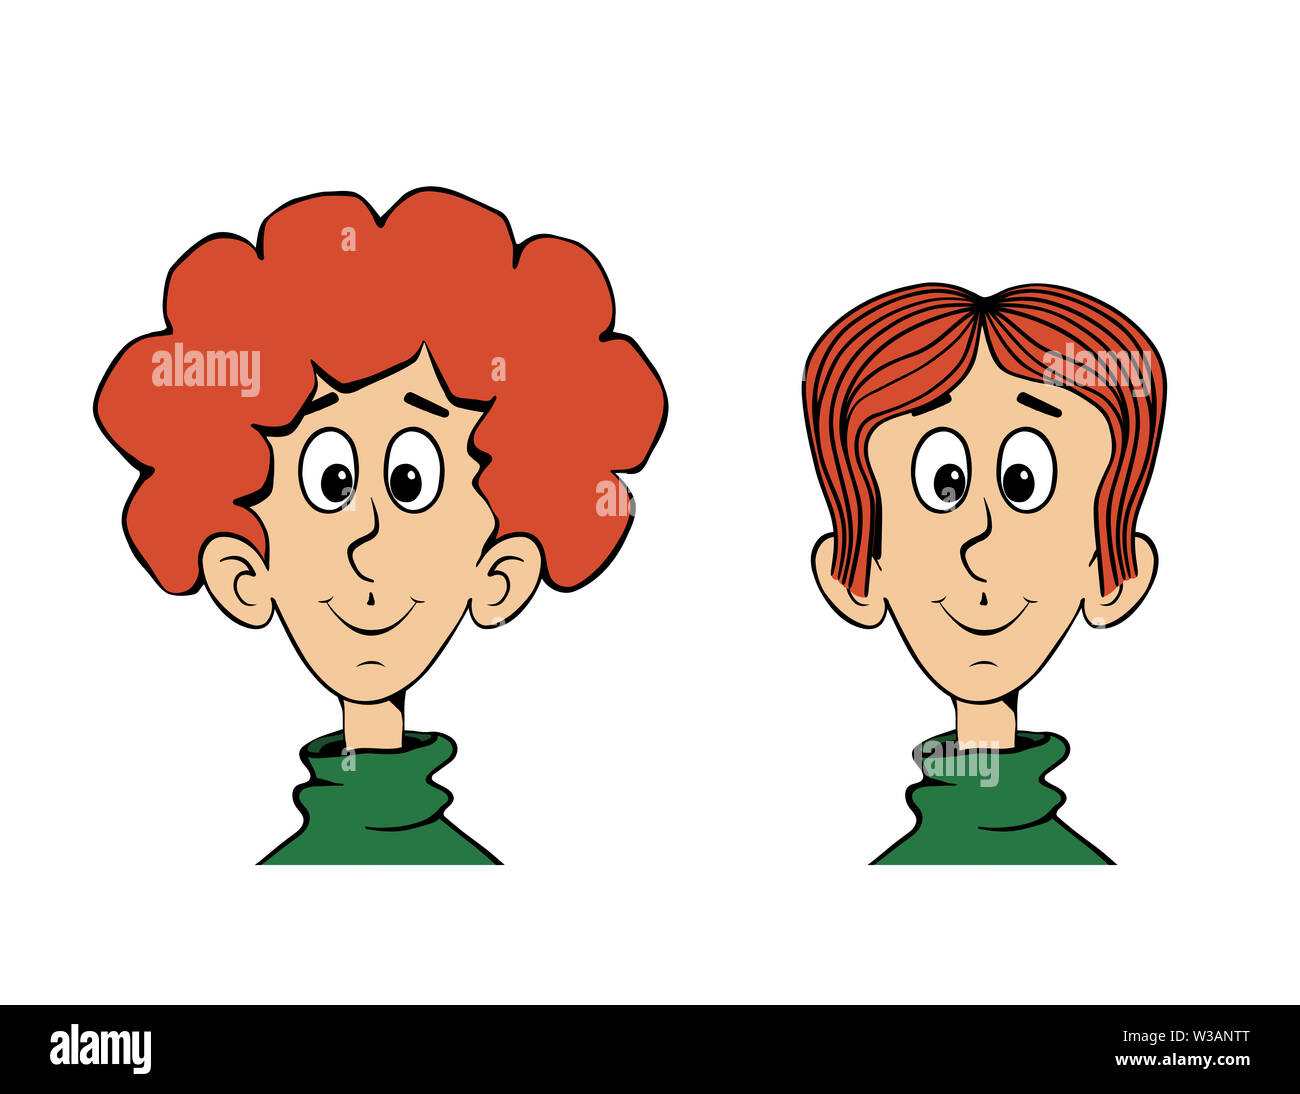 cartoon man face with two hairstyles wavy and straight hair Stock Photo